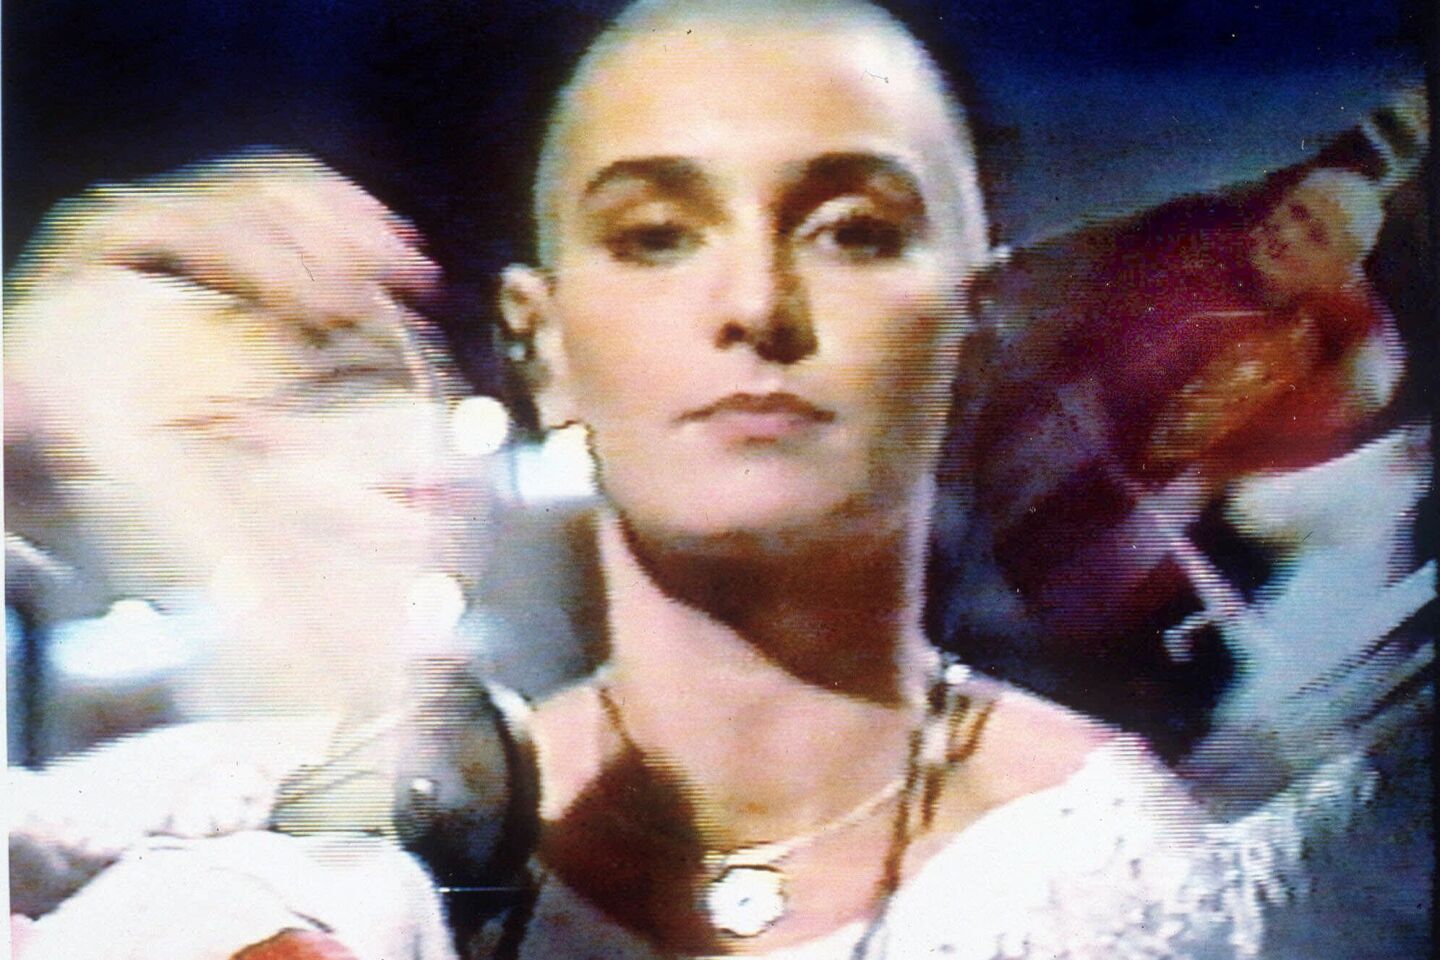 Sinead O'Connor's most memorable pop culture moment came in 1992 when she ripped up a picture of Pope John Paul II during a live appearance in New York on NBC's "Saturday Night Live" after performing a cover version of Bob Marley's "War."